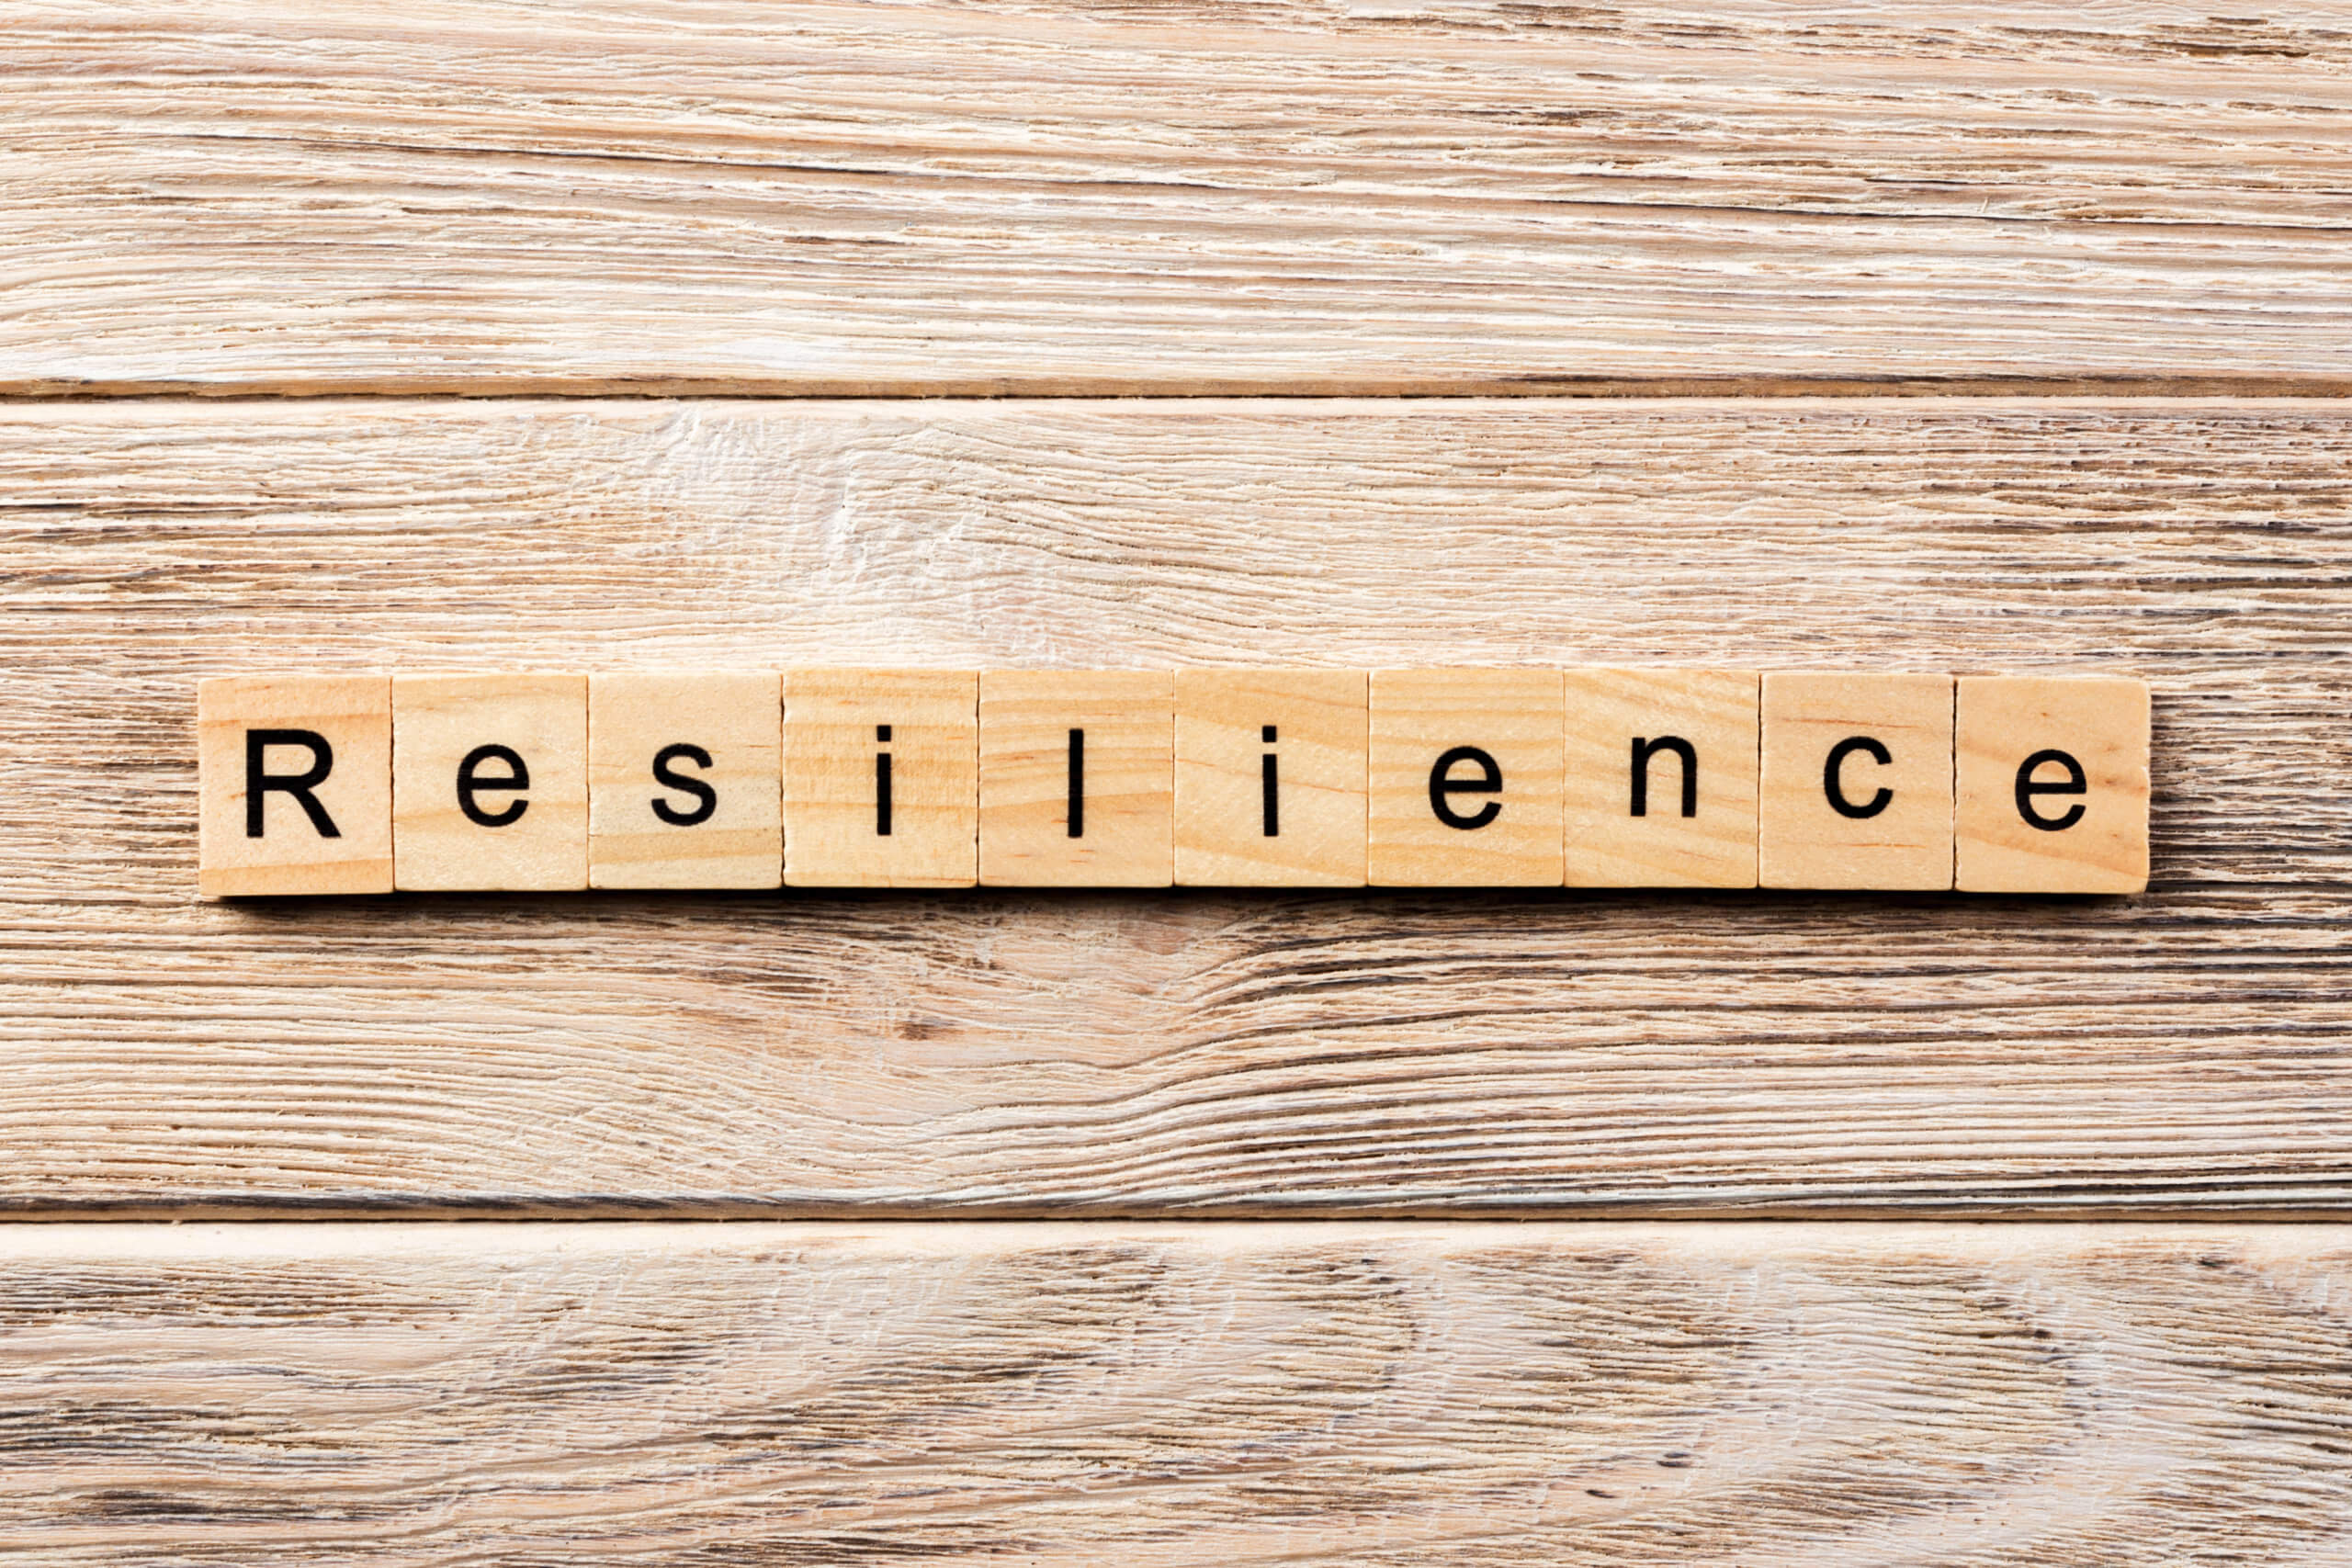 resilience explained